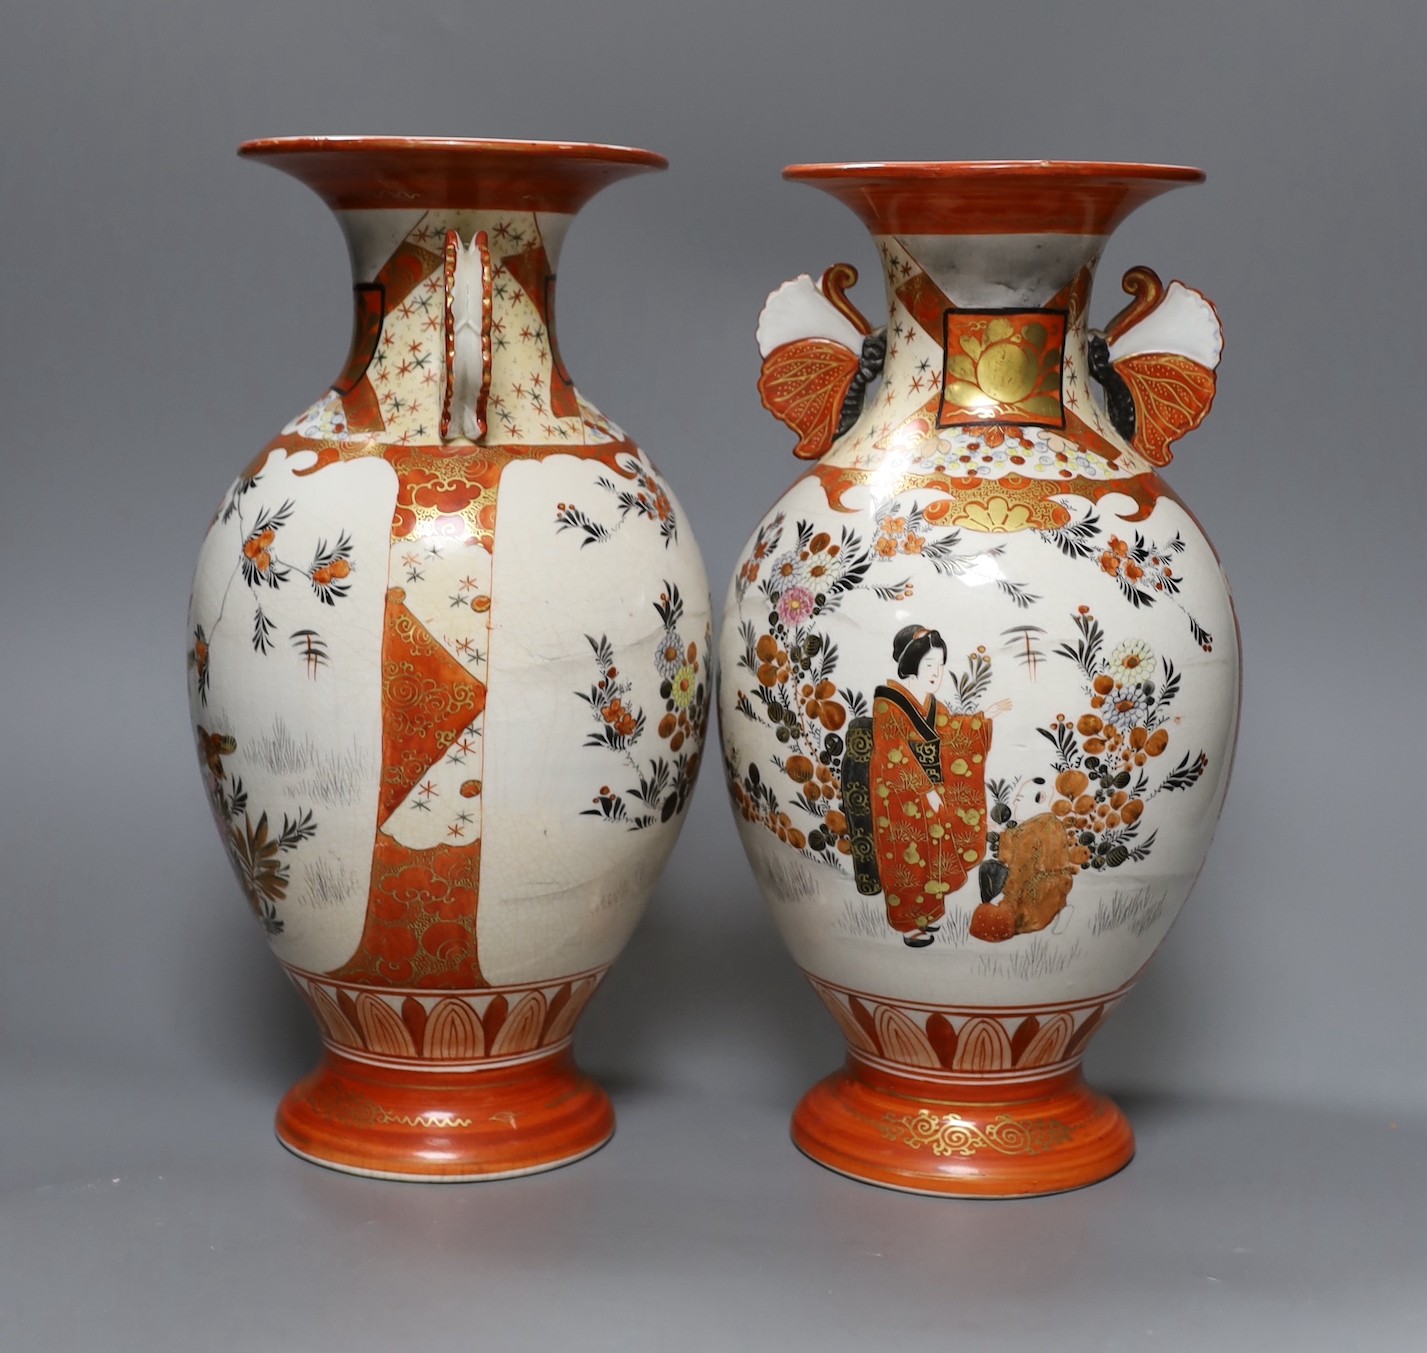 4 Chinese blanc-de-chine figures, a Chinese puce enamelled vase and a pair of Japanese Kutani vases, vases 32cms high